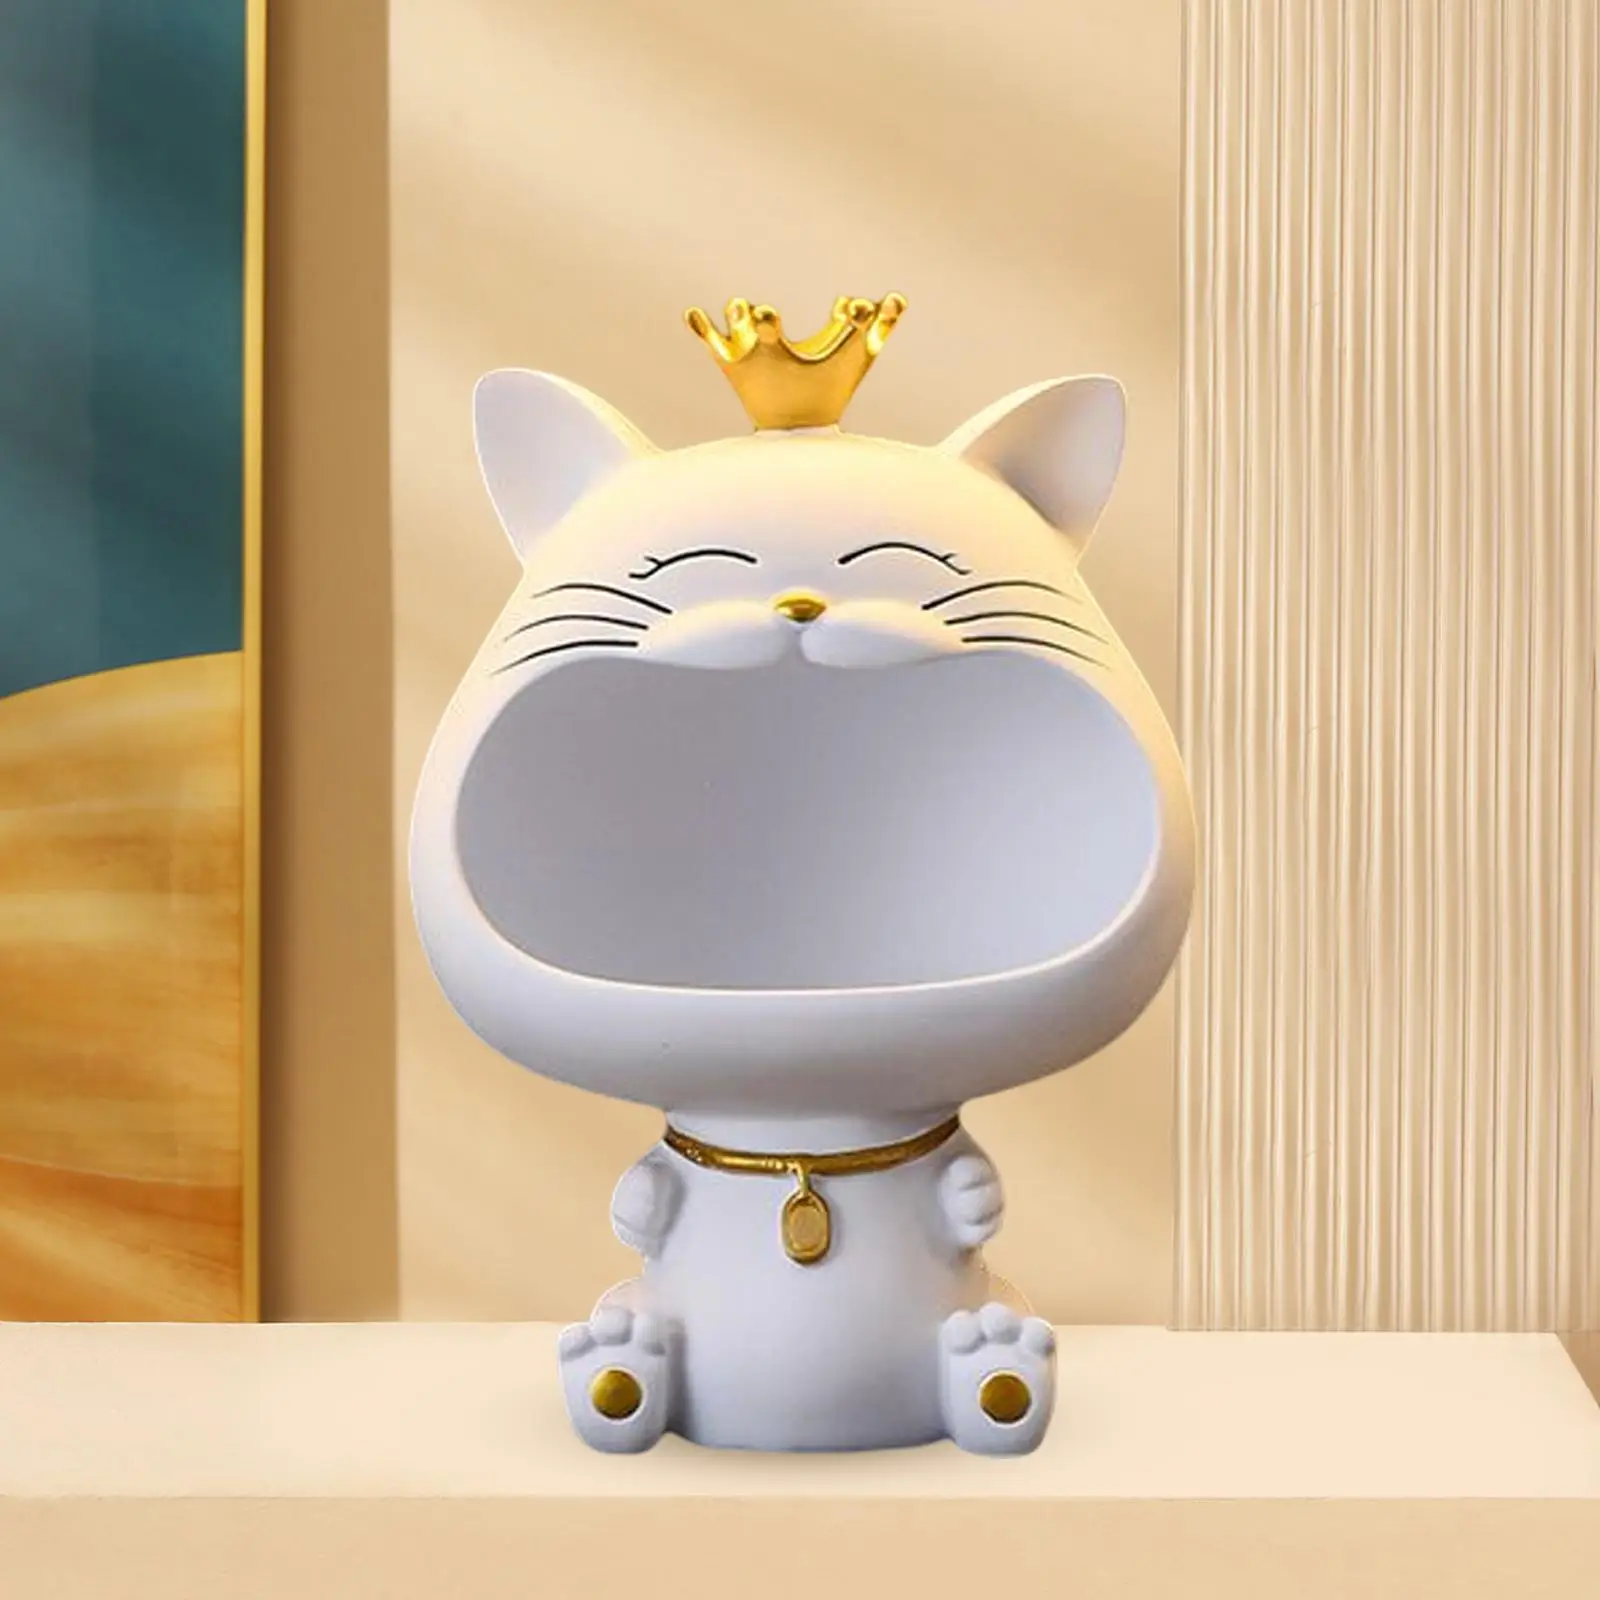 Modern Cat Figurine Snack Holder Abstract Sculpture Candy Sorting Storage Box for Party Home Office Decoration Birthday Gift